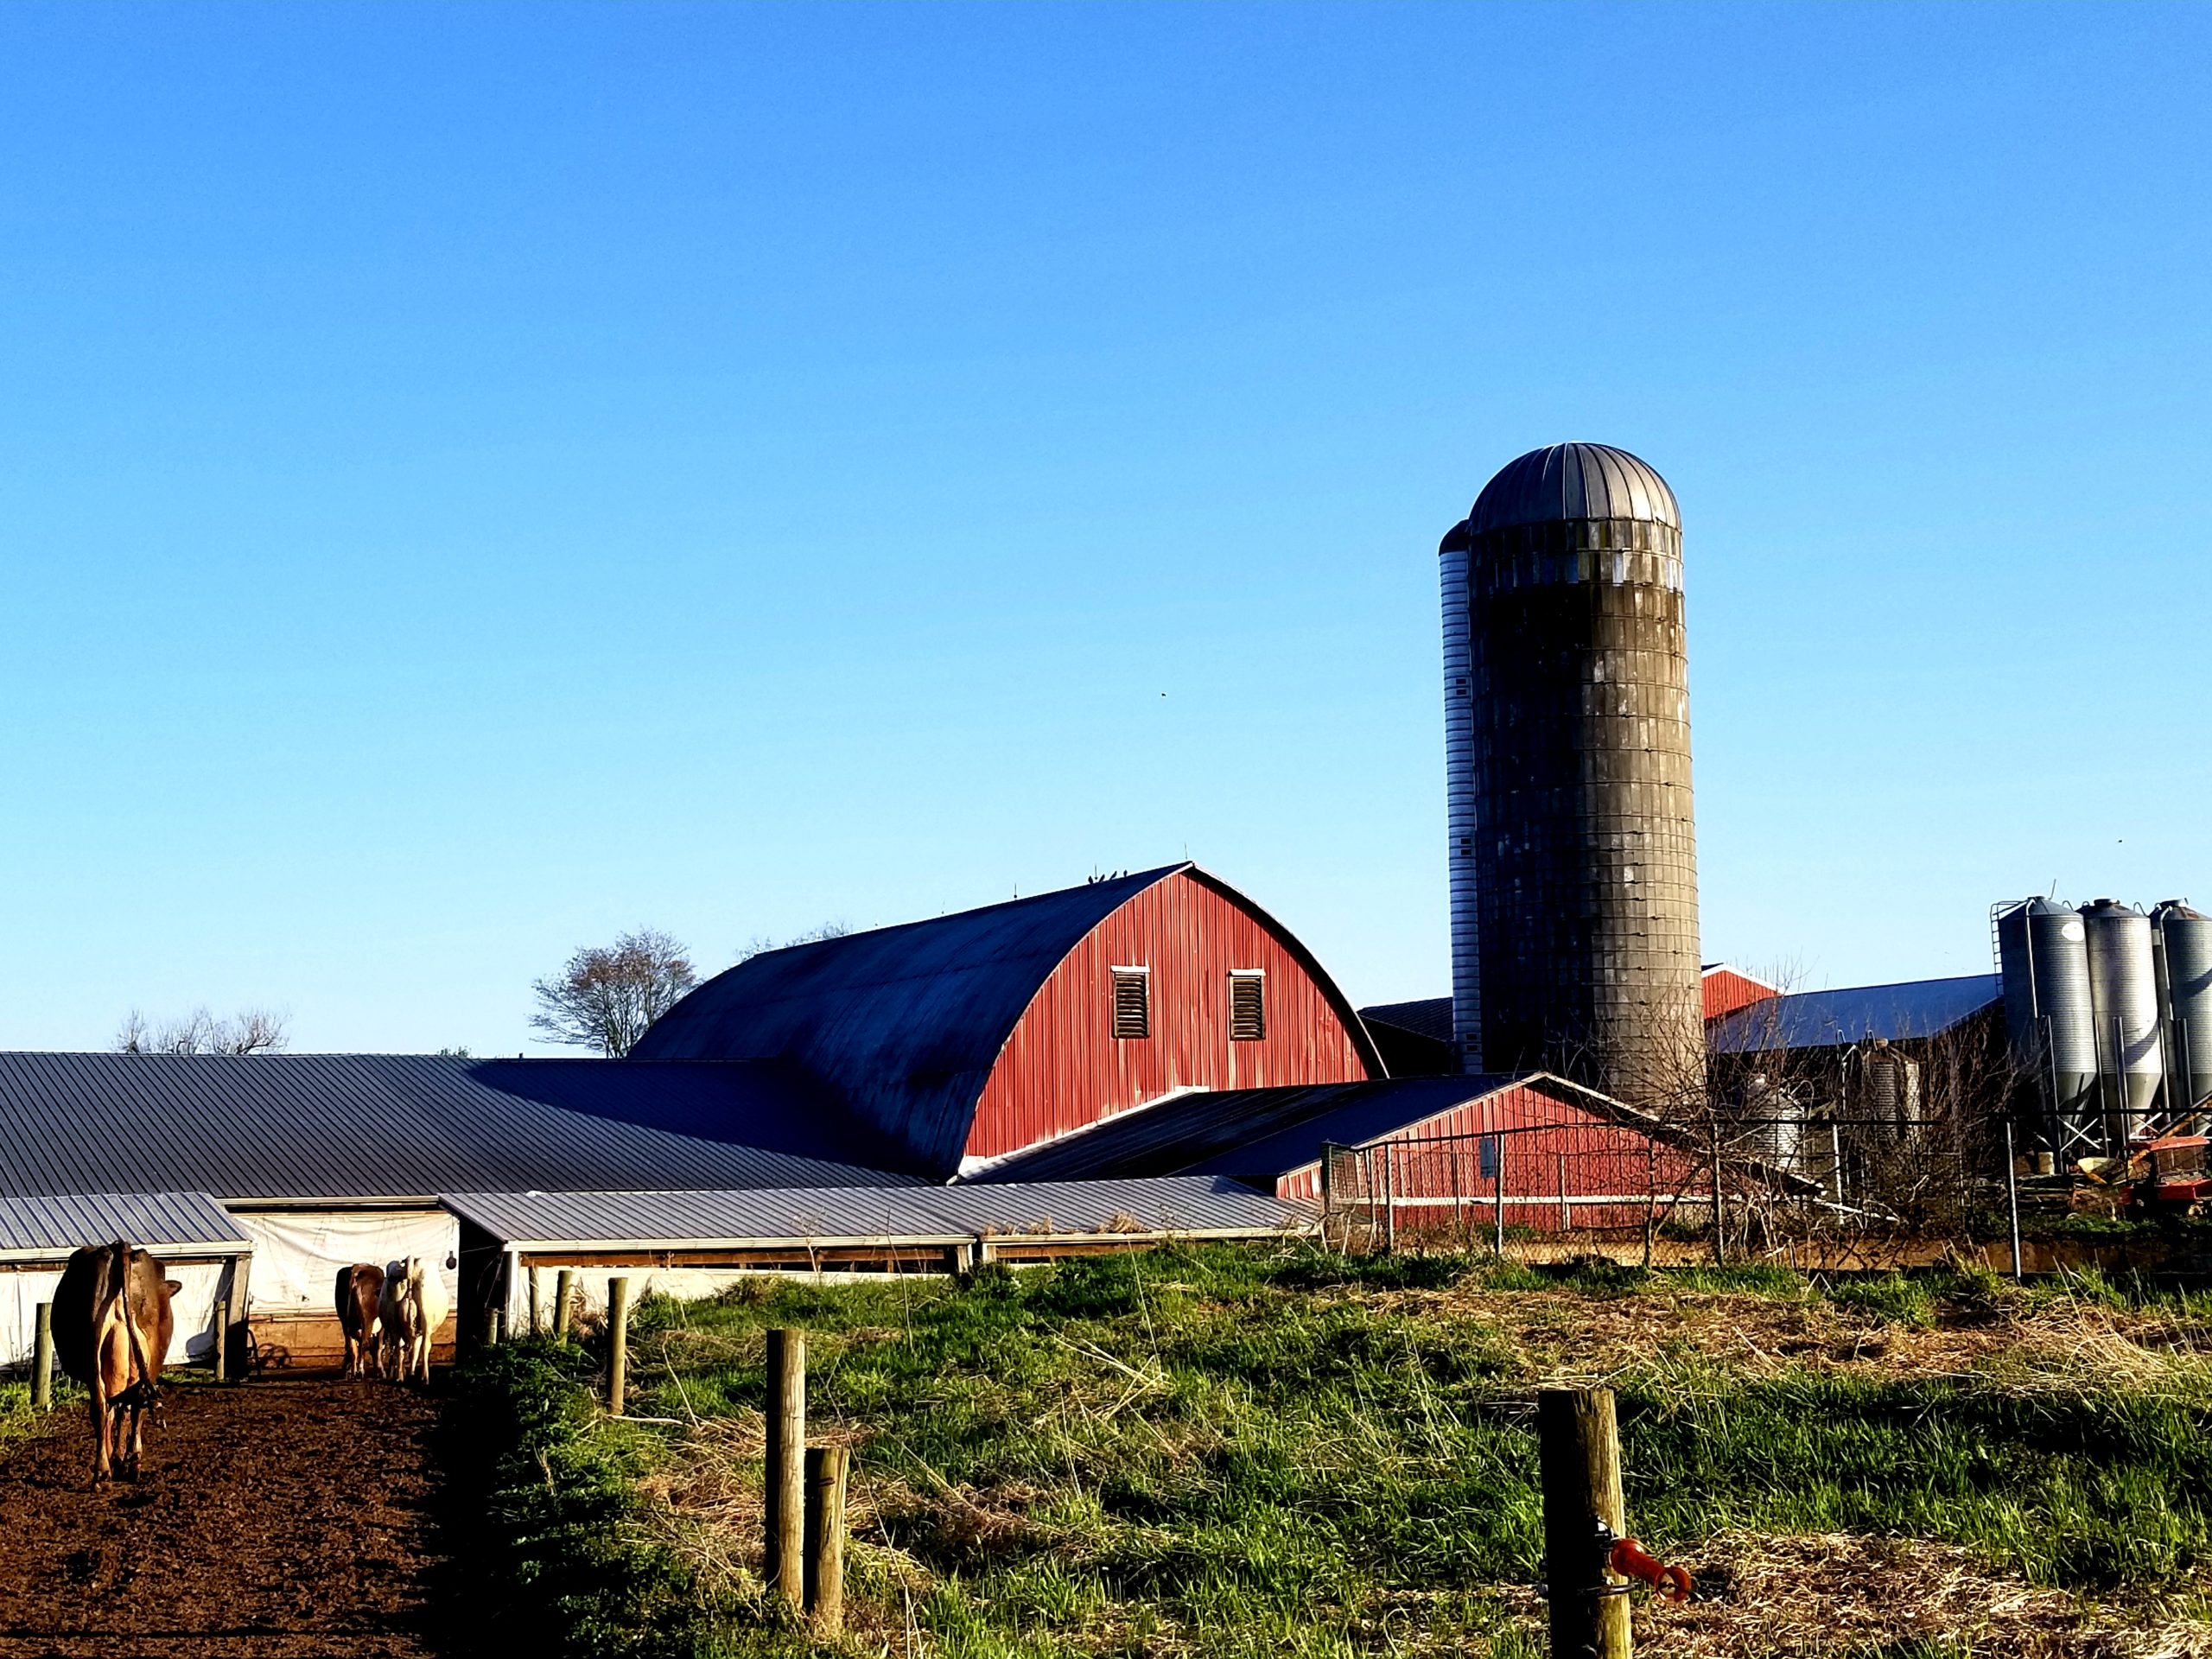 A dairy farm with a red barn and 3 dairy cows walking alongside a field.